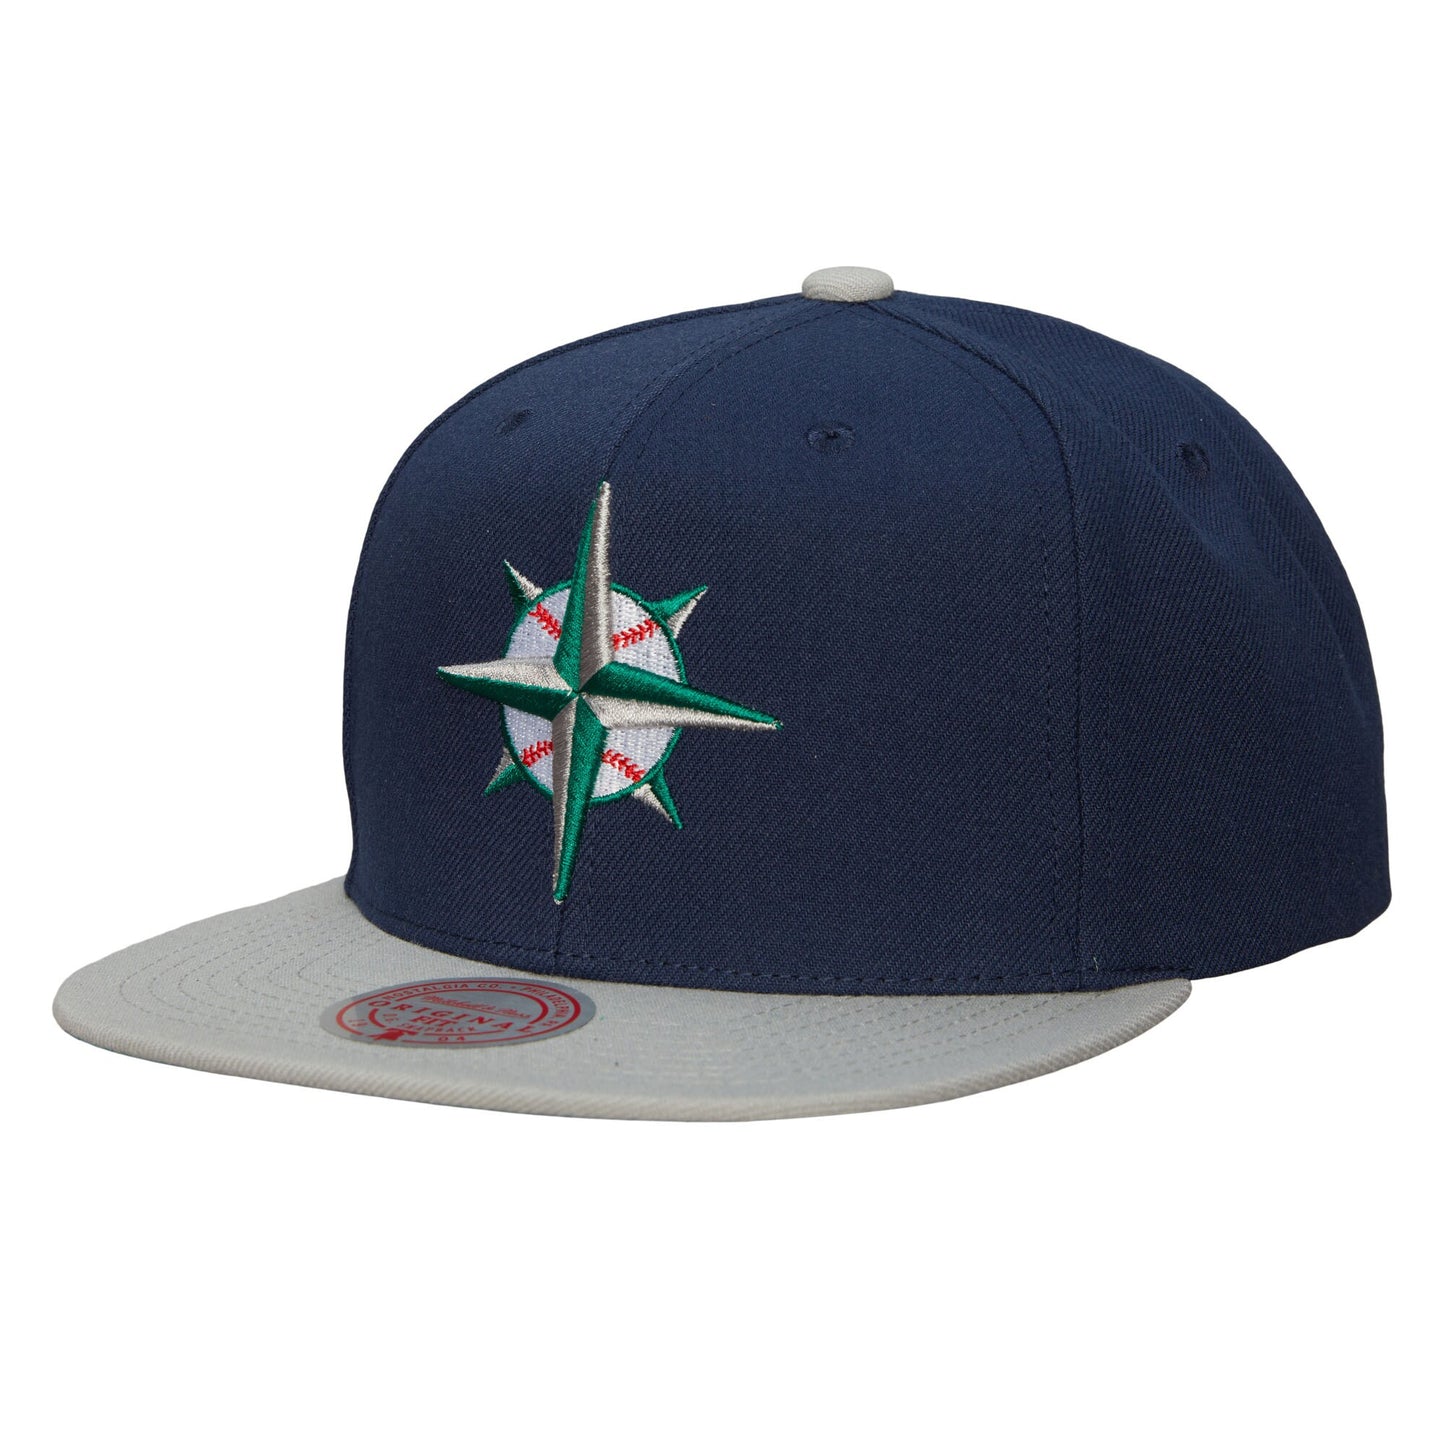 Seattle Mariners Mitchell & Ness Cooperstown Collection Evergreen Snapback Hat - Navy